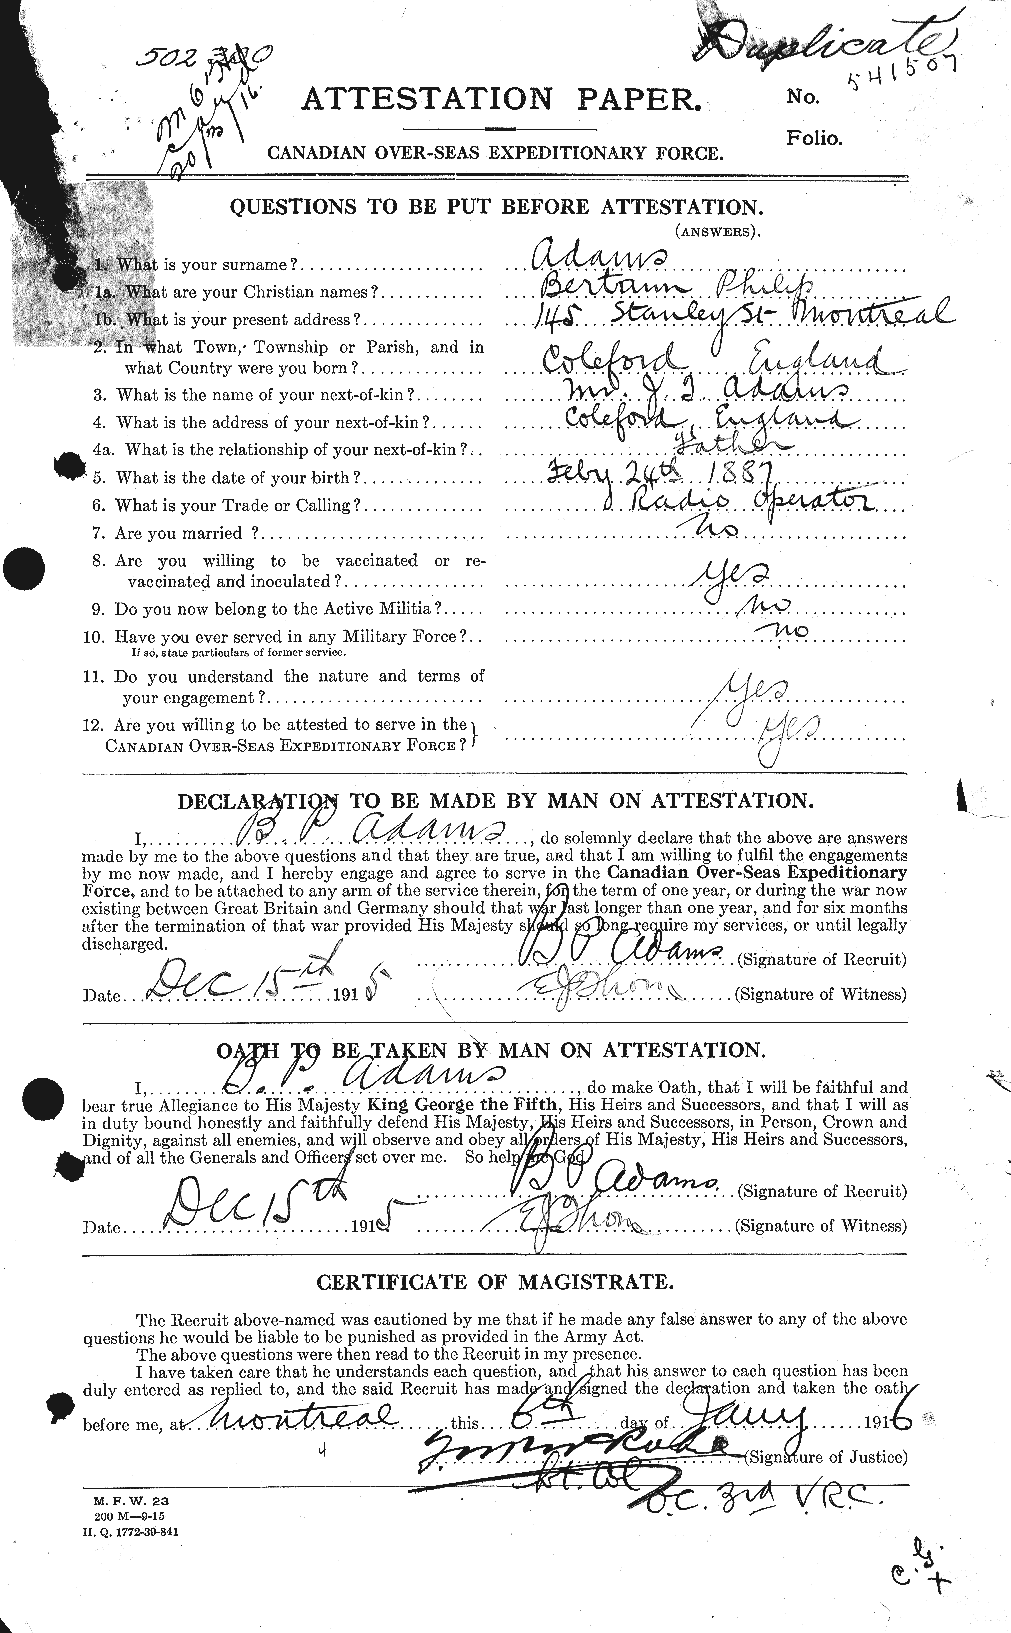 Personnel Records of the First World War - CEF 202041a